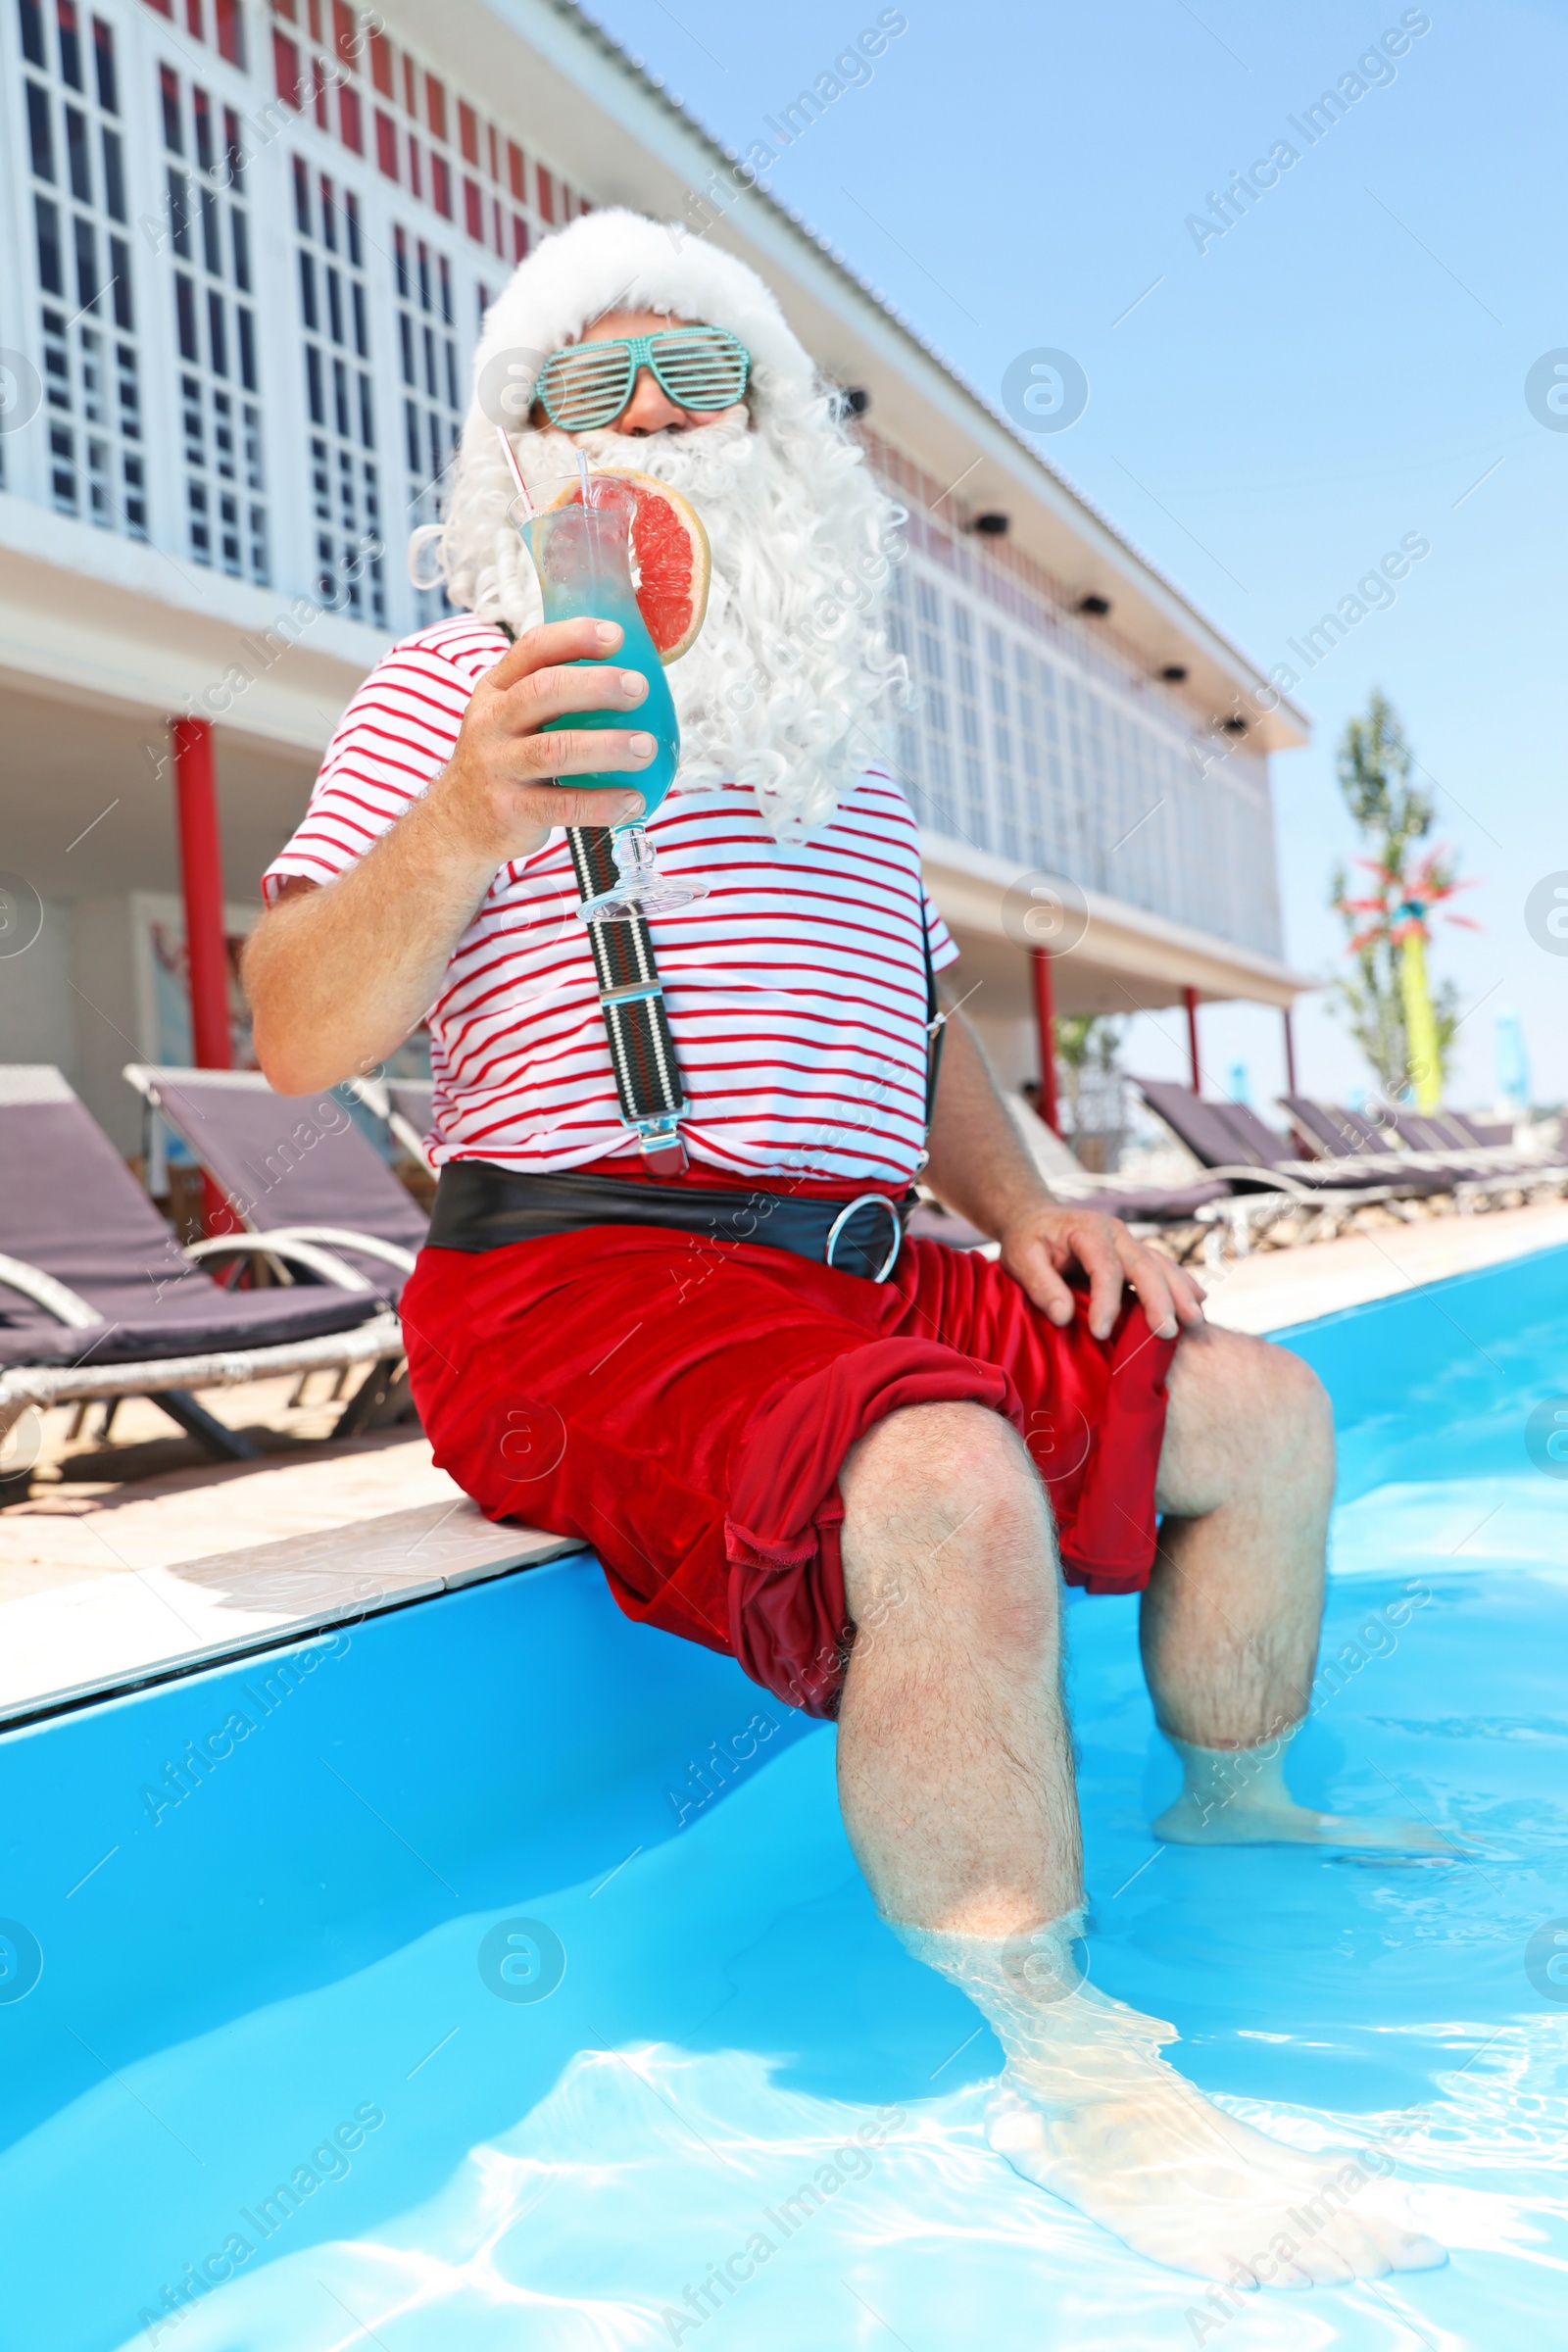 Photo of Authentic Santa Claus with cocktail near pool at resort